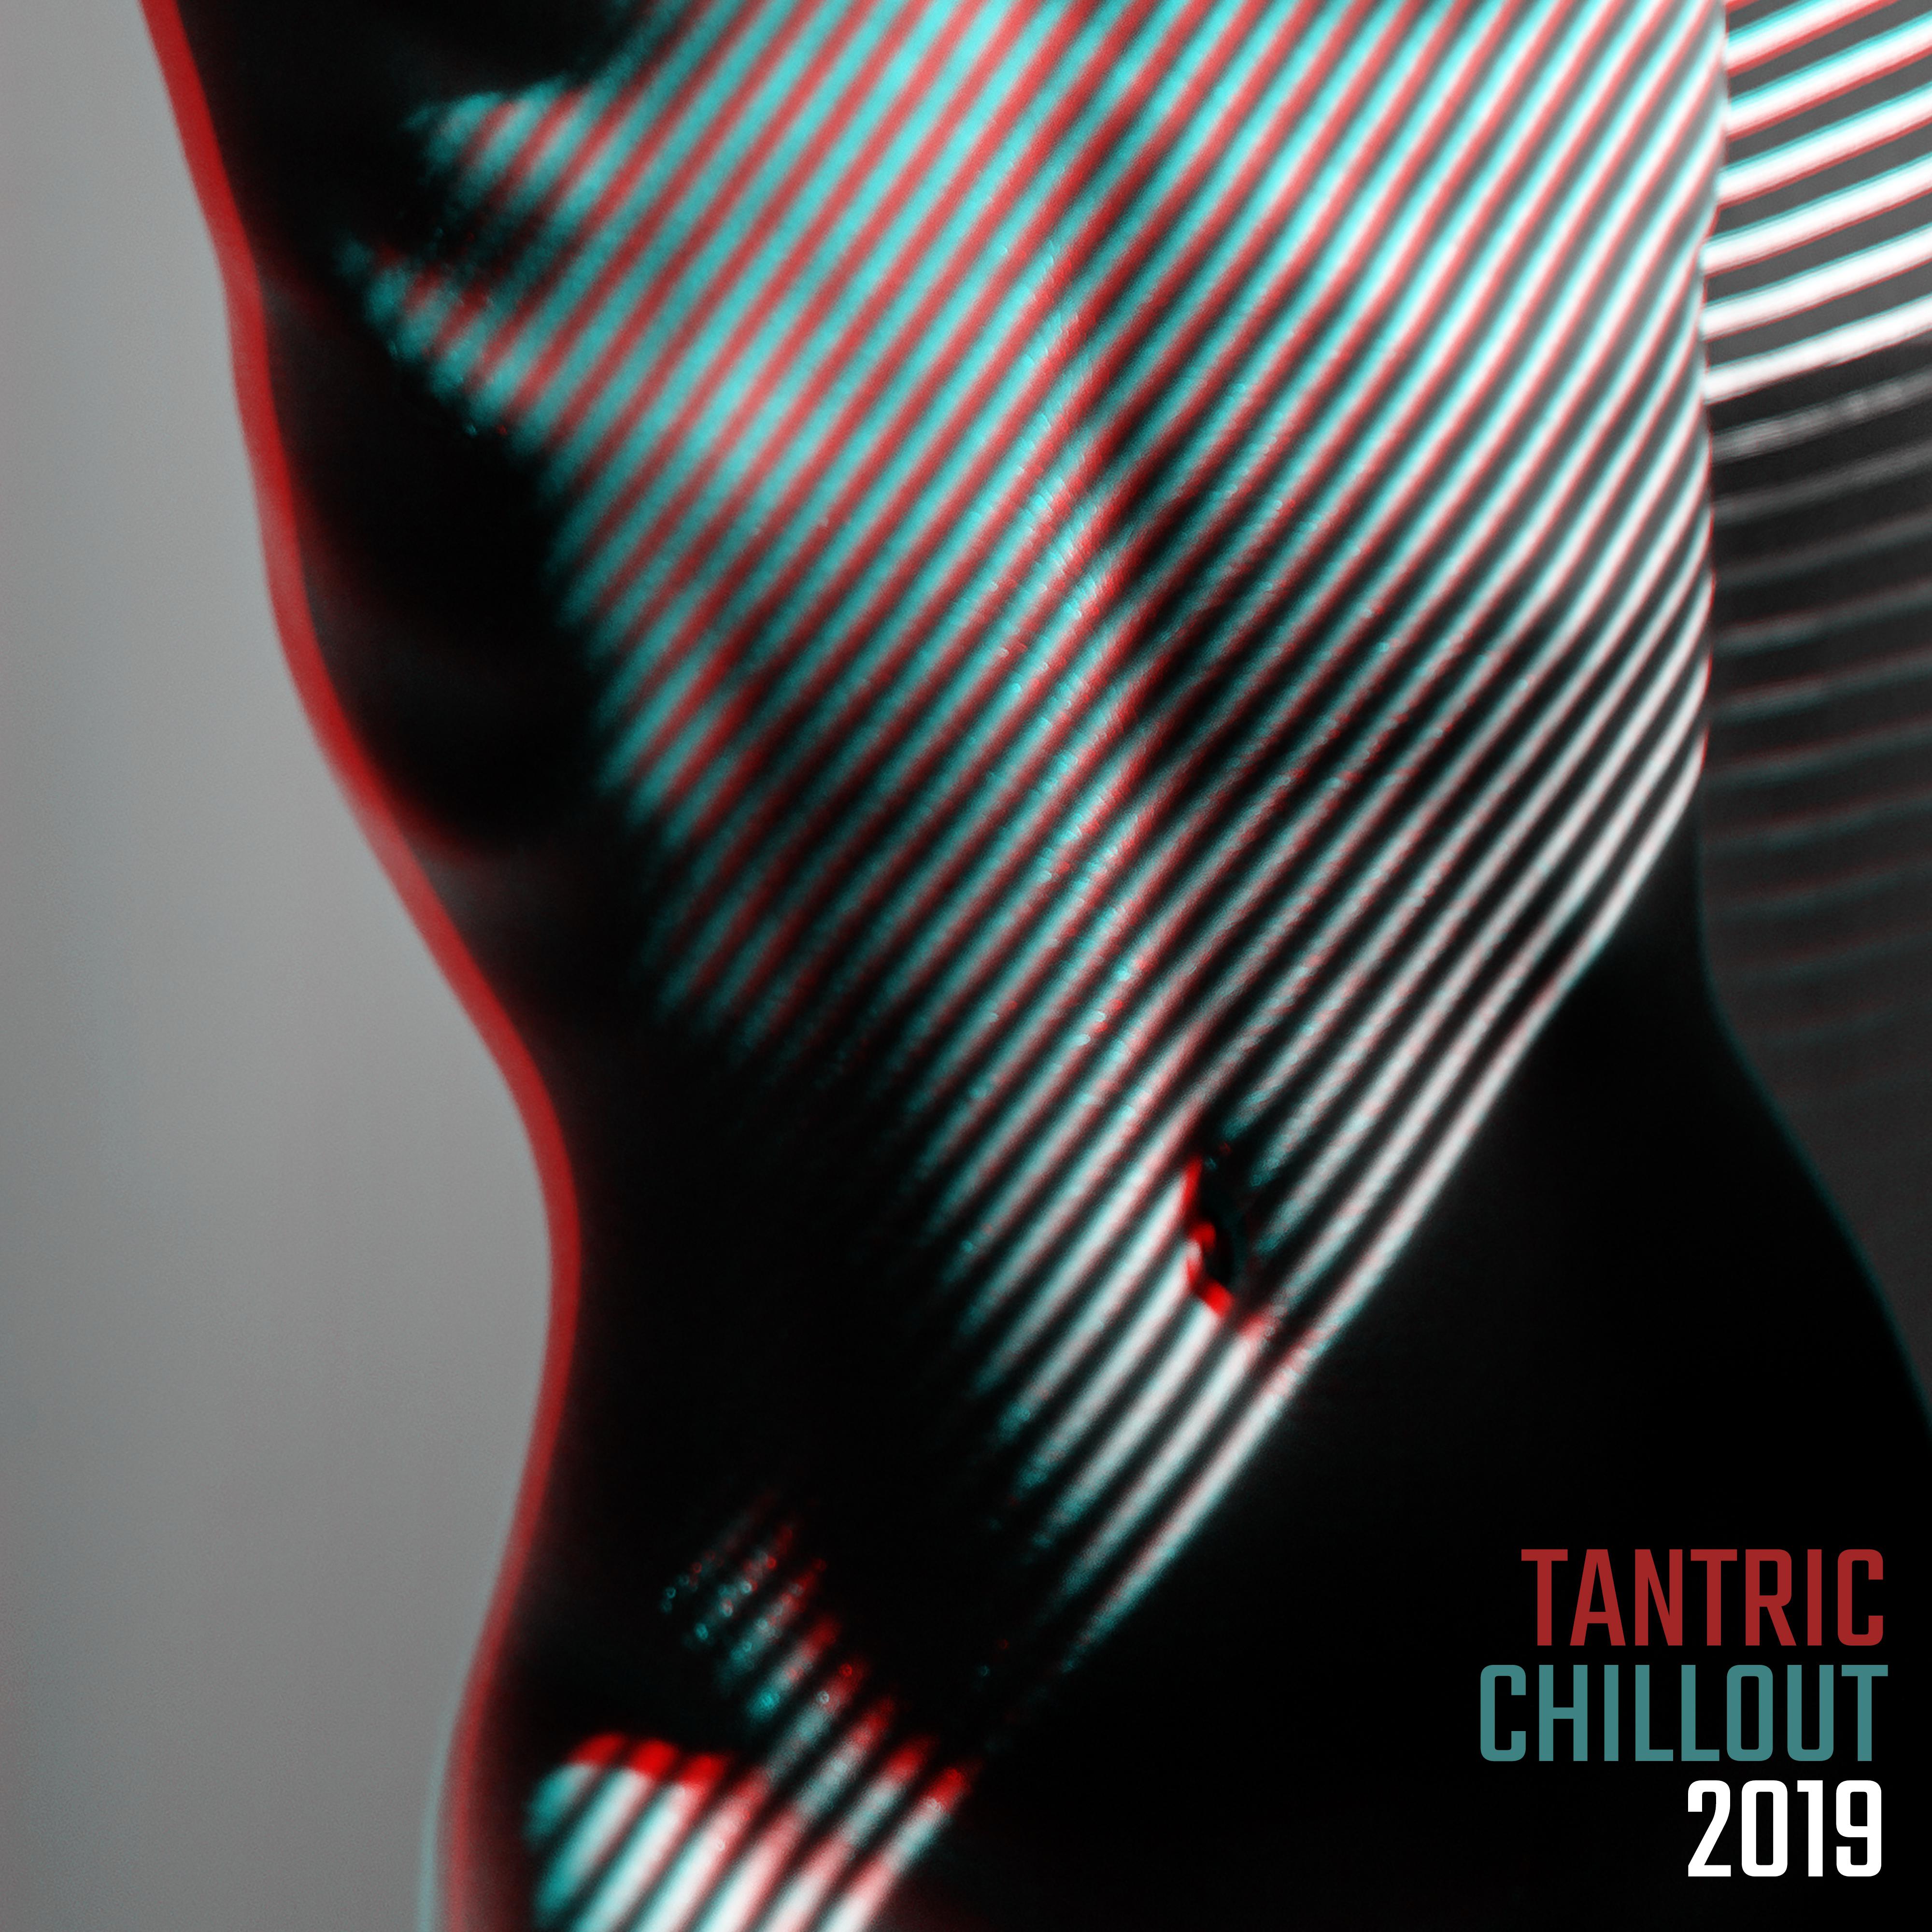 Tantric Chillout 2019 – Kamasutra Music, Pure Relaxation, Making Love, Pathway to Orgasm, Erotic Vibes, Tantric ***, Chill Out 2019